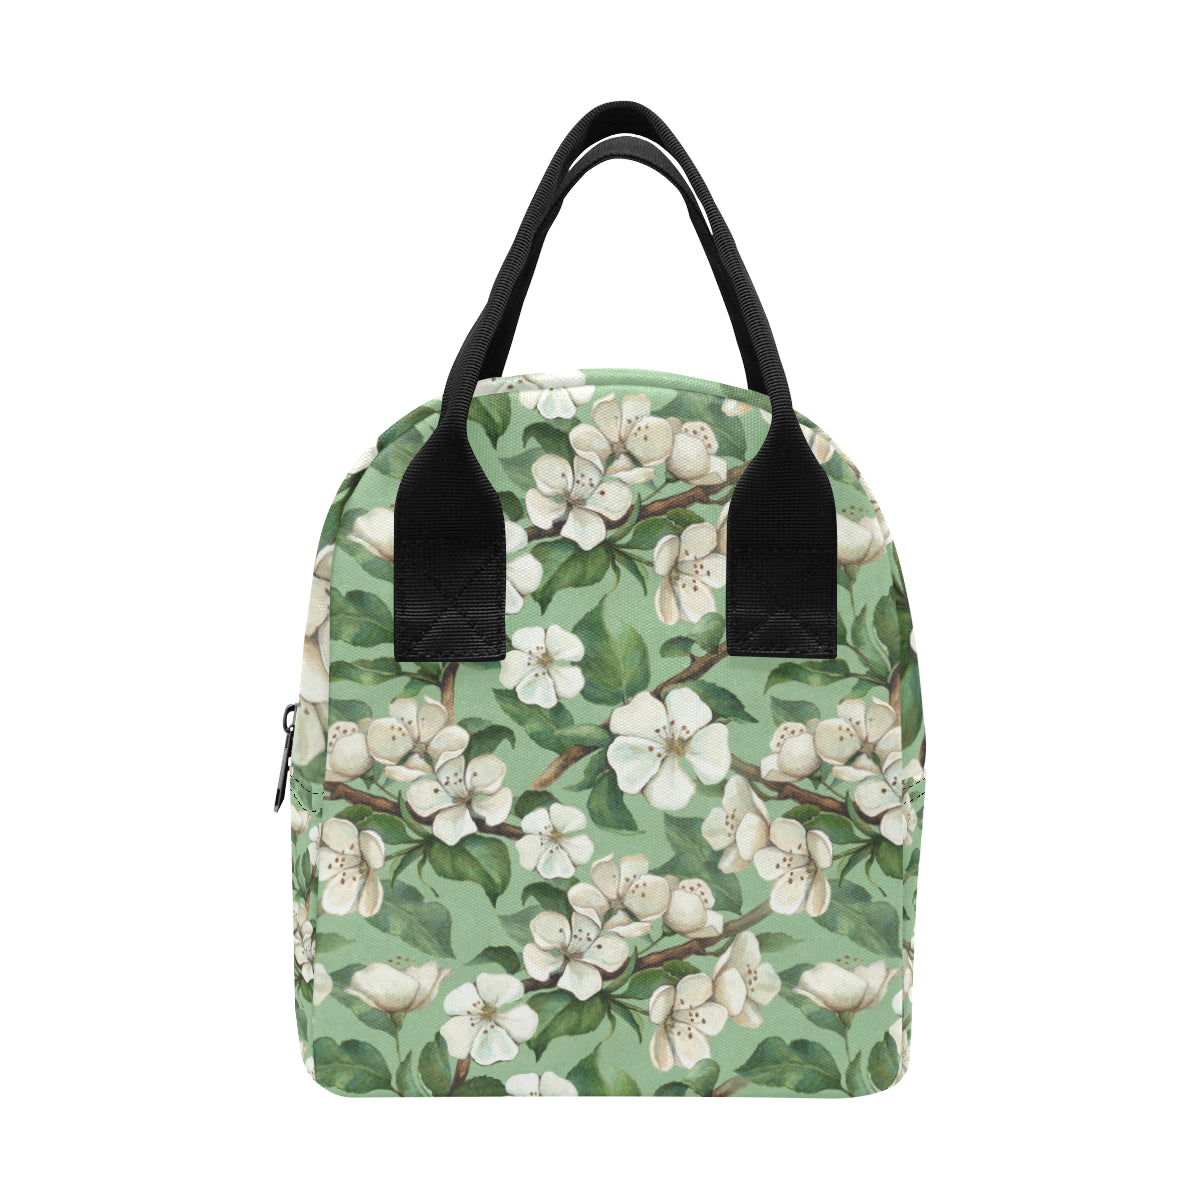 Apple blossom Pattern Print Design AB02 Insulated Lunch Bag